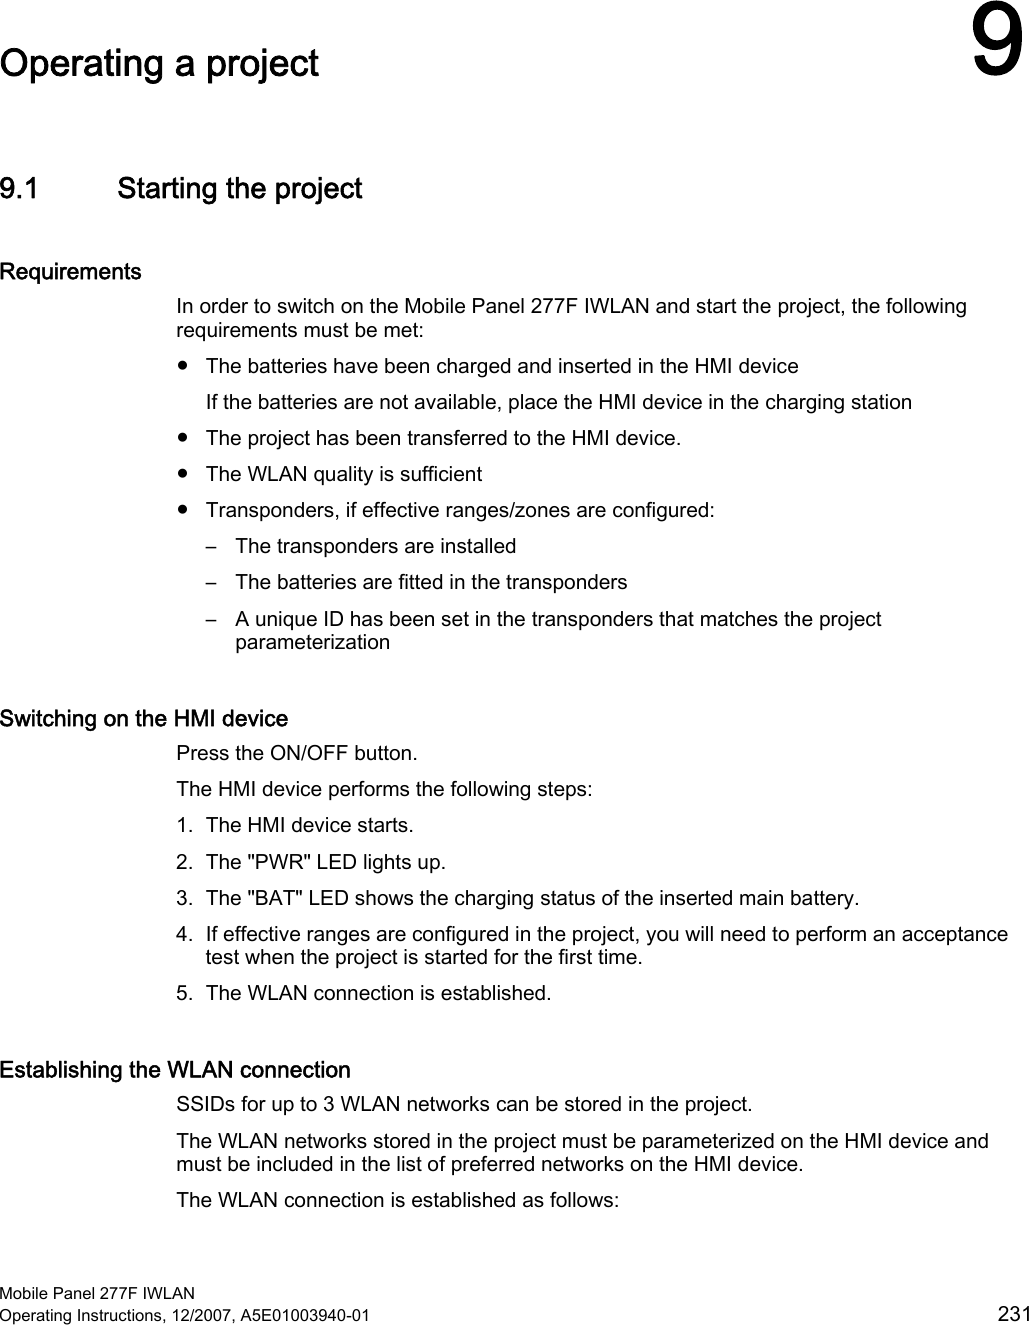  Mobile Panel 277F IWLAN Operating Instructions, 12/2007, A5E01003940-01  231 Operating a project  99.1 Starting the project Requirements In order to switch on the Mobile Panel 277F IWLAN and start the project, the following requirements must be met: ●  The batteries have been charged and inserted in the HMI device If the batteries are not available, place the HMI device in the charging station ●  The project has been transferred to the HMI device. ●  The WLAN quality is sufficient ●  Transponders, if effective ranges/zones are configured: –  The transponders are installed –  The batteries are fitted in the transponders –  A unique ID has been set in the transponders that matches the project parameterization Switching on the HMI device Press the ON/OFF button.  The HMI device performs the following steps: 1. The HMI device starts. 2. The &quot;PWR&quot; LED lights up. 3. The &quot;BAT&quot; LED shows the charging status of the inserted main battery. 4. If effective ranges are configured in the project, you will need to perform an acceptance test when the project is started for the first time. 5. The WLAN connection is established. Establishing the WLAN connection SSIDs for up to 3 WLAN networks can be stored in the project. The WLAN networks stored in the project must be parameterized on the HMI device and must be included in the list of preferred networks on the HMI device. The WLAN connection is established as follows: 